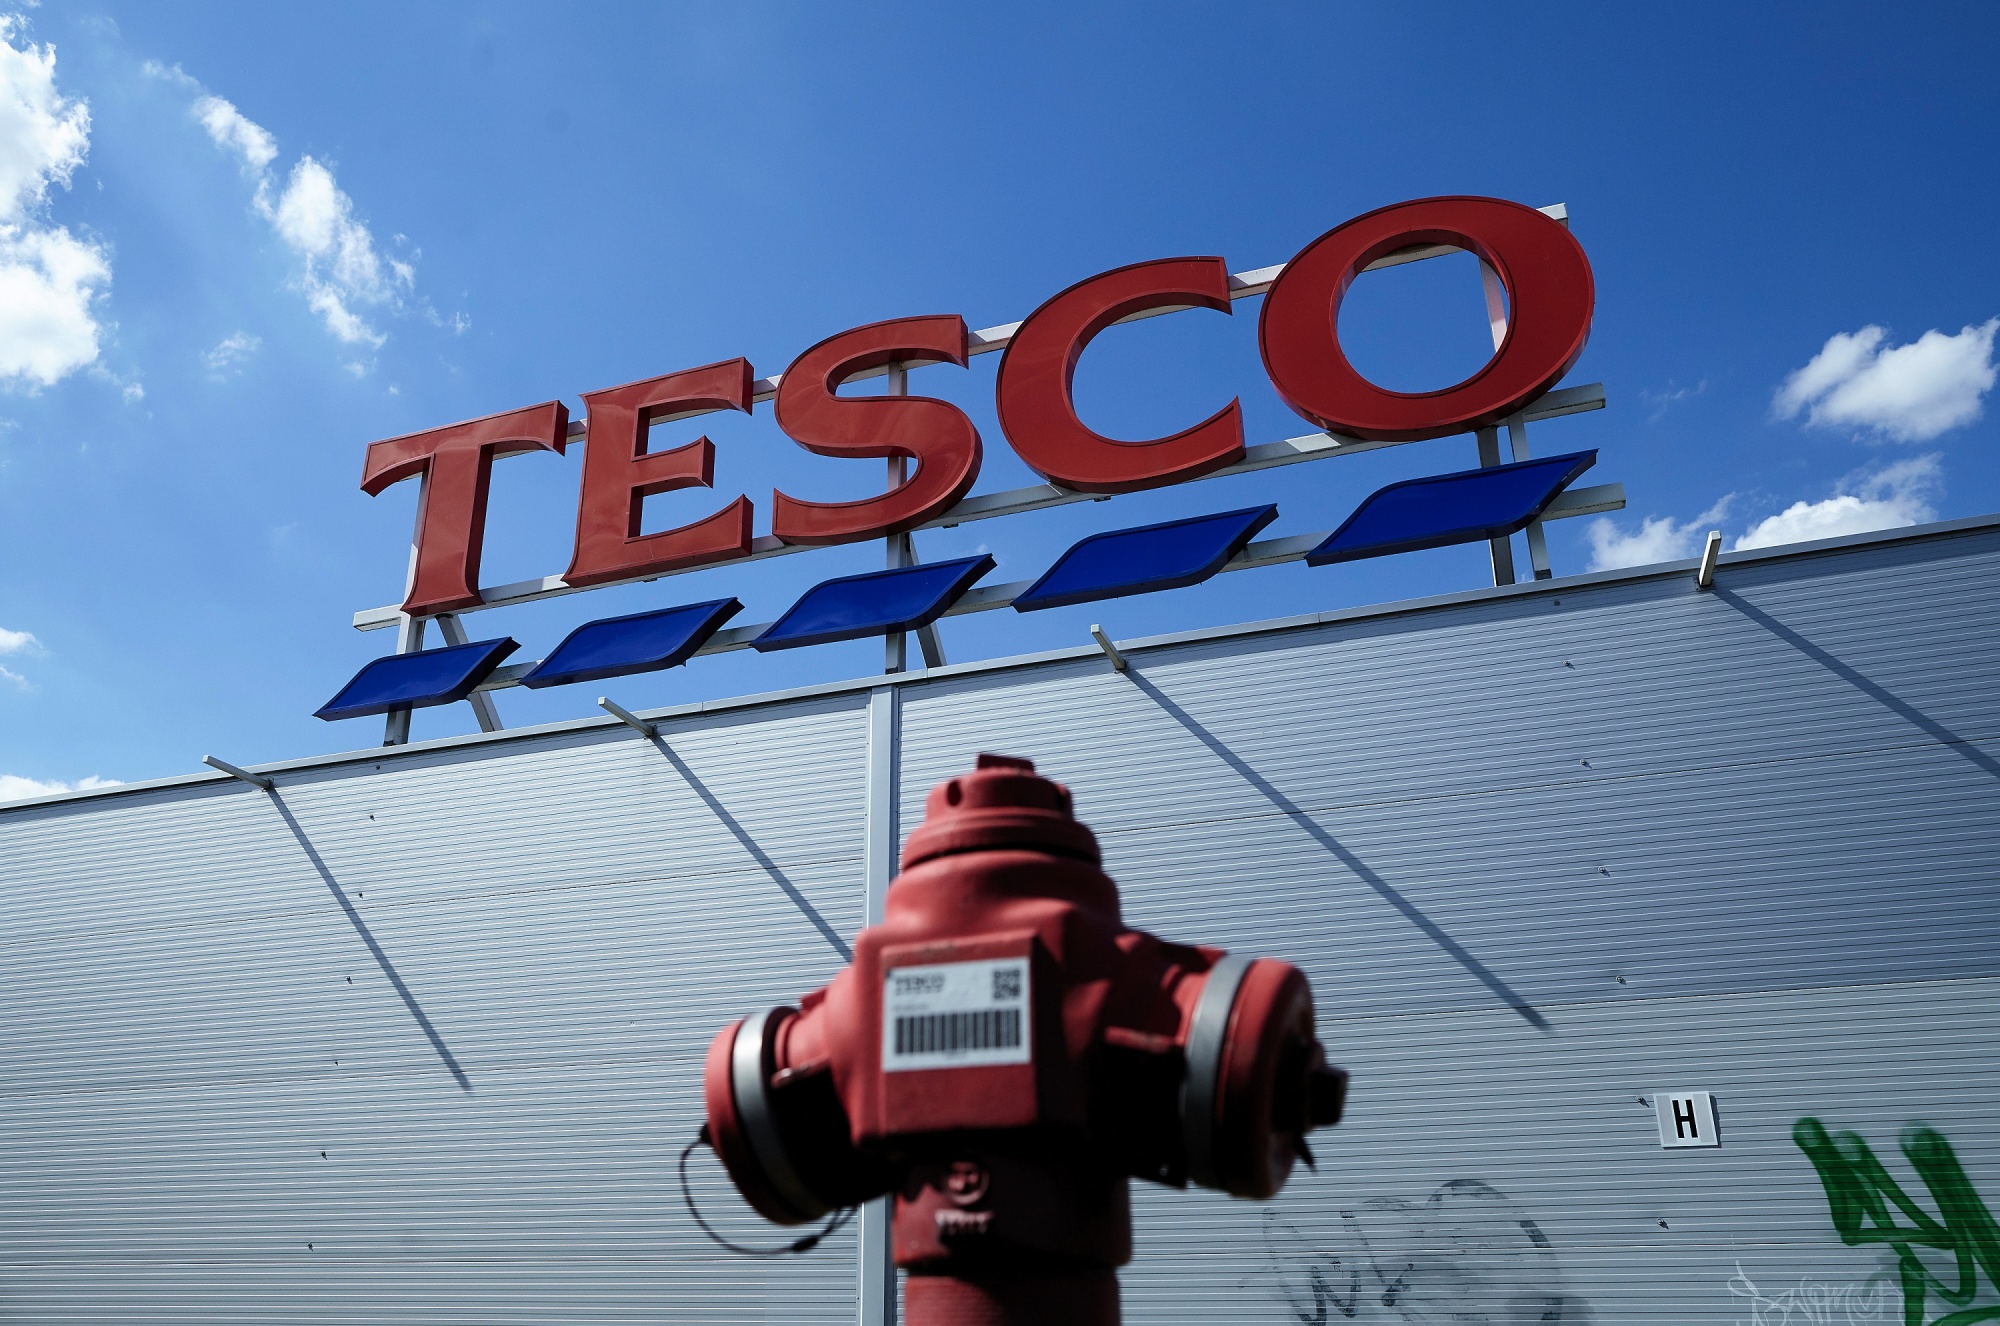 Tesco Still Pays Workers Below the Minimum Wage, Exposing Its Persistent Issues